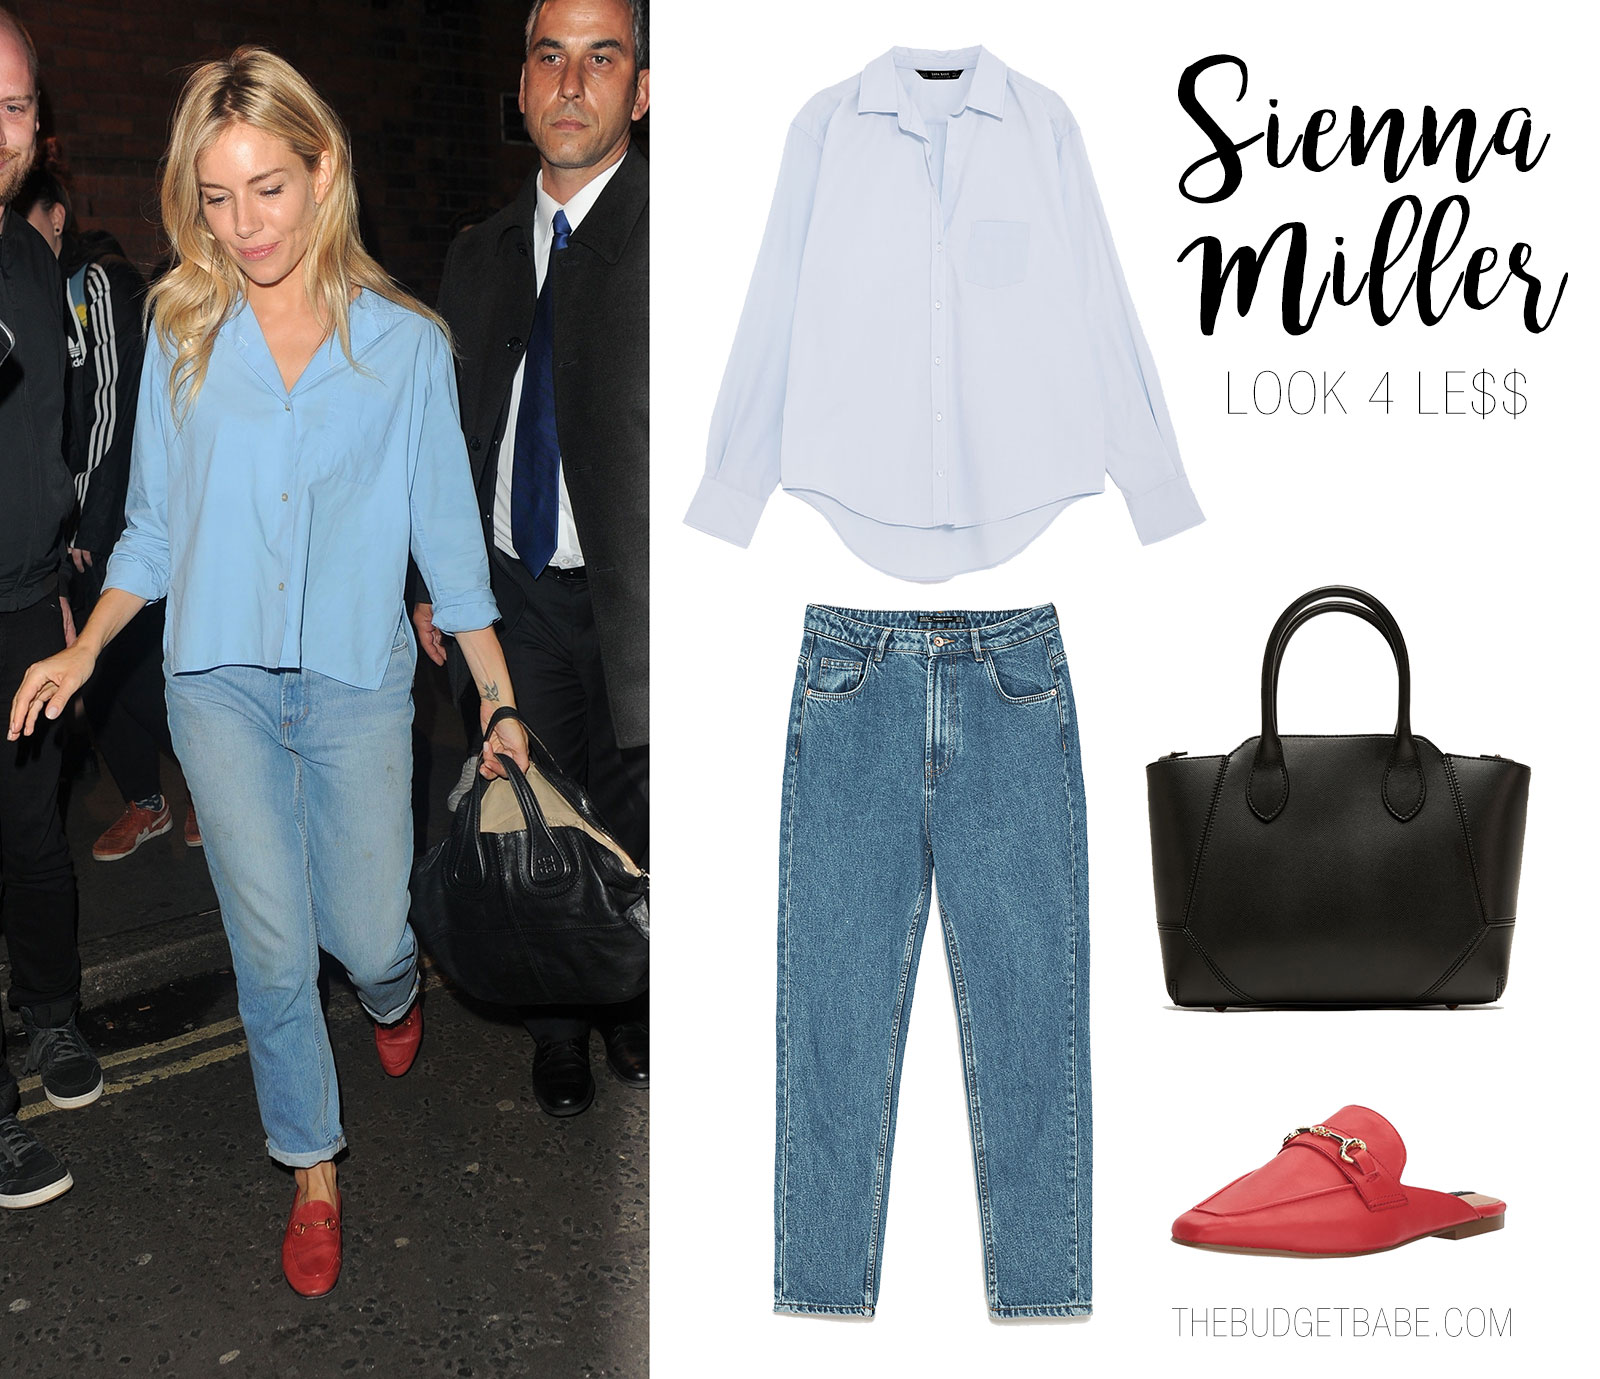 Sienna Miller's minimal mom jeans and red loafers look for less